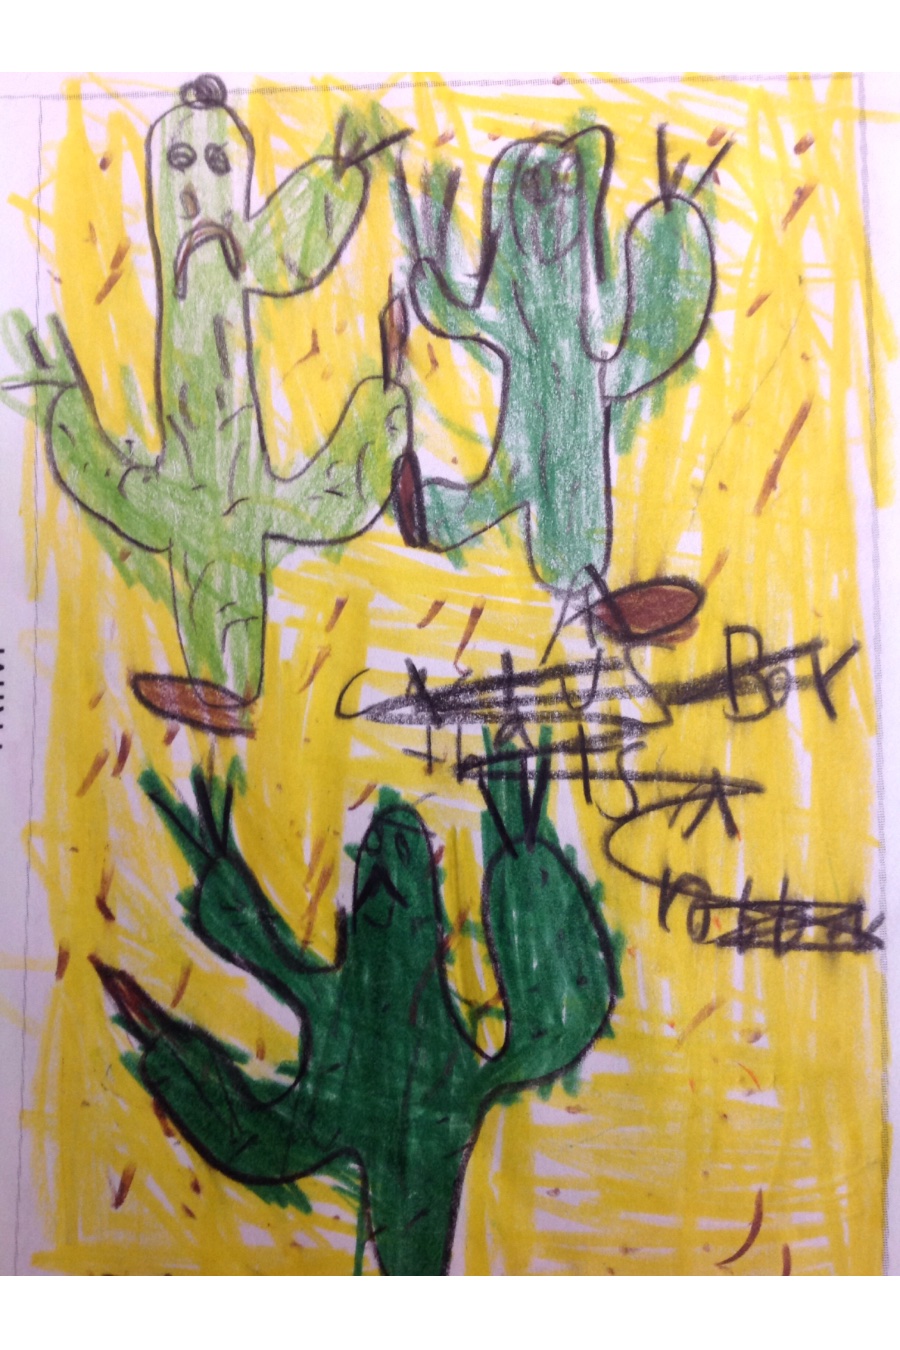 Cactus Boy That is a Robber by Nia W